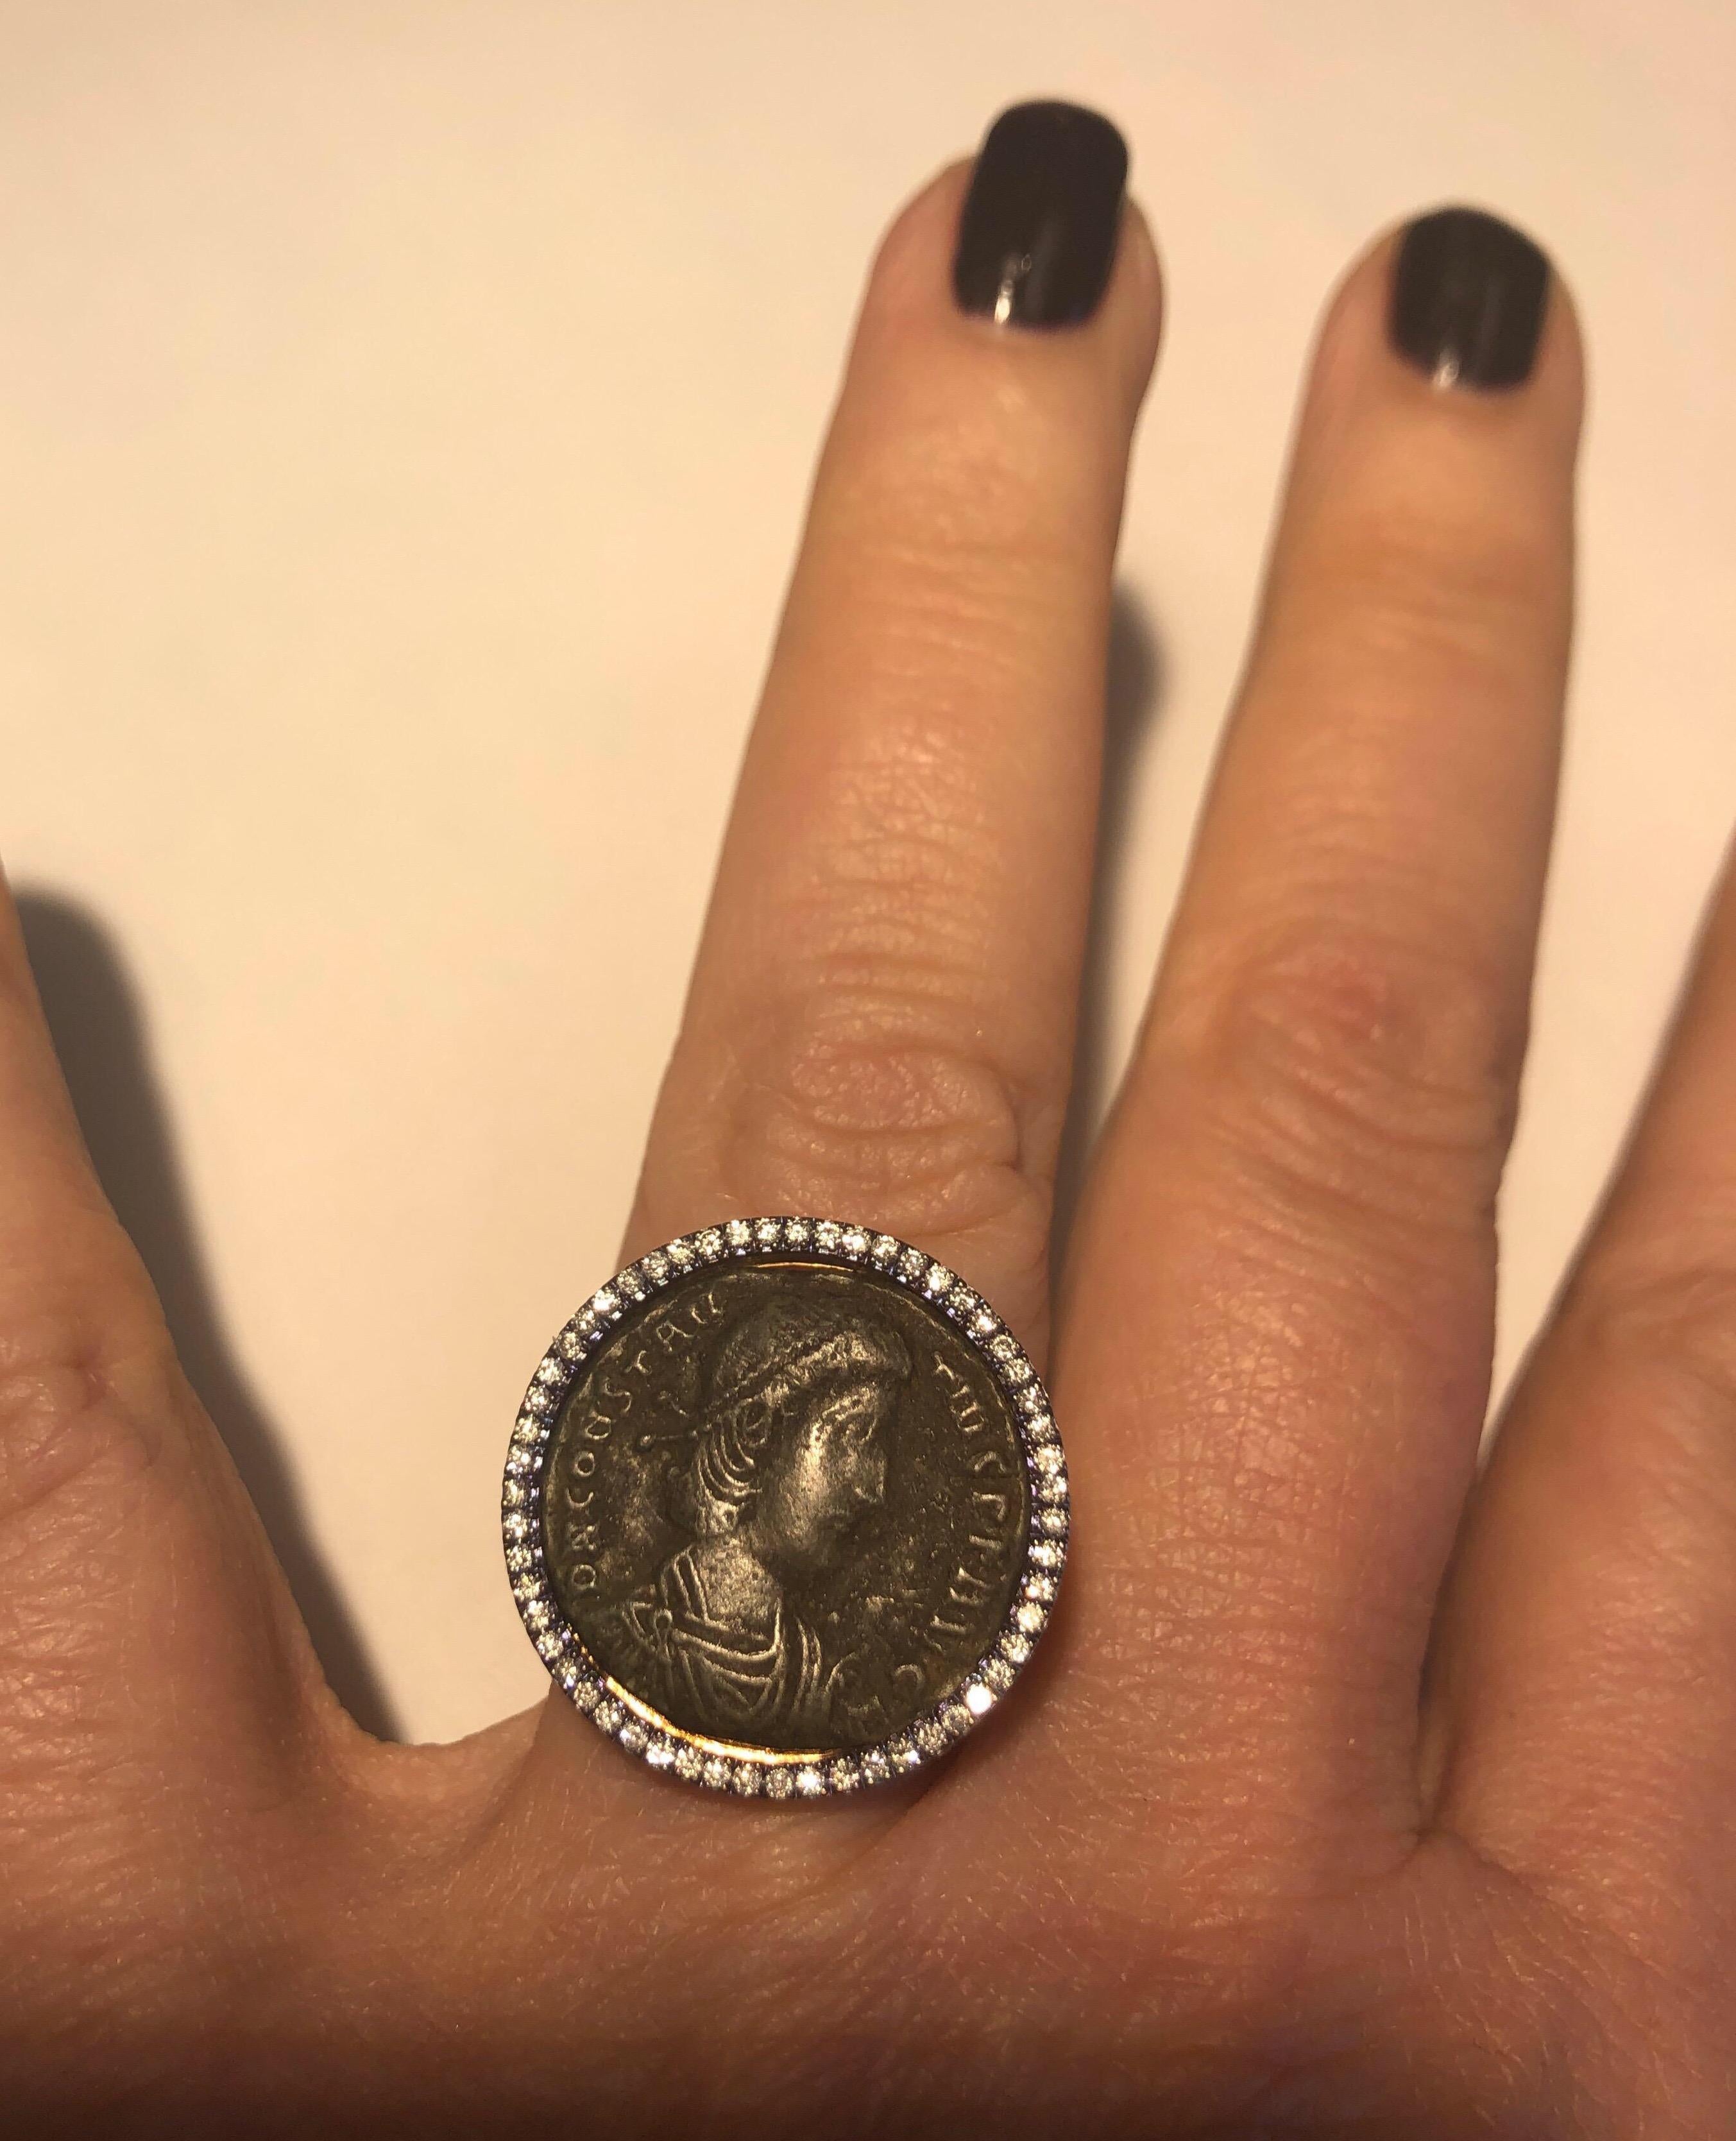 18K rose gold ring set with bronze ancient Roman coin surrounded by full cut round diamonds and diamonds partway down shank weighing .45cts .

Retail $3750
Finger size 5.75, may be sized